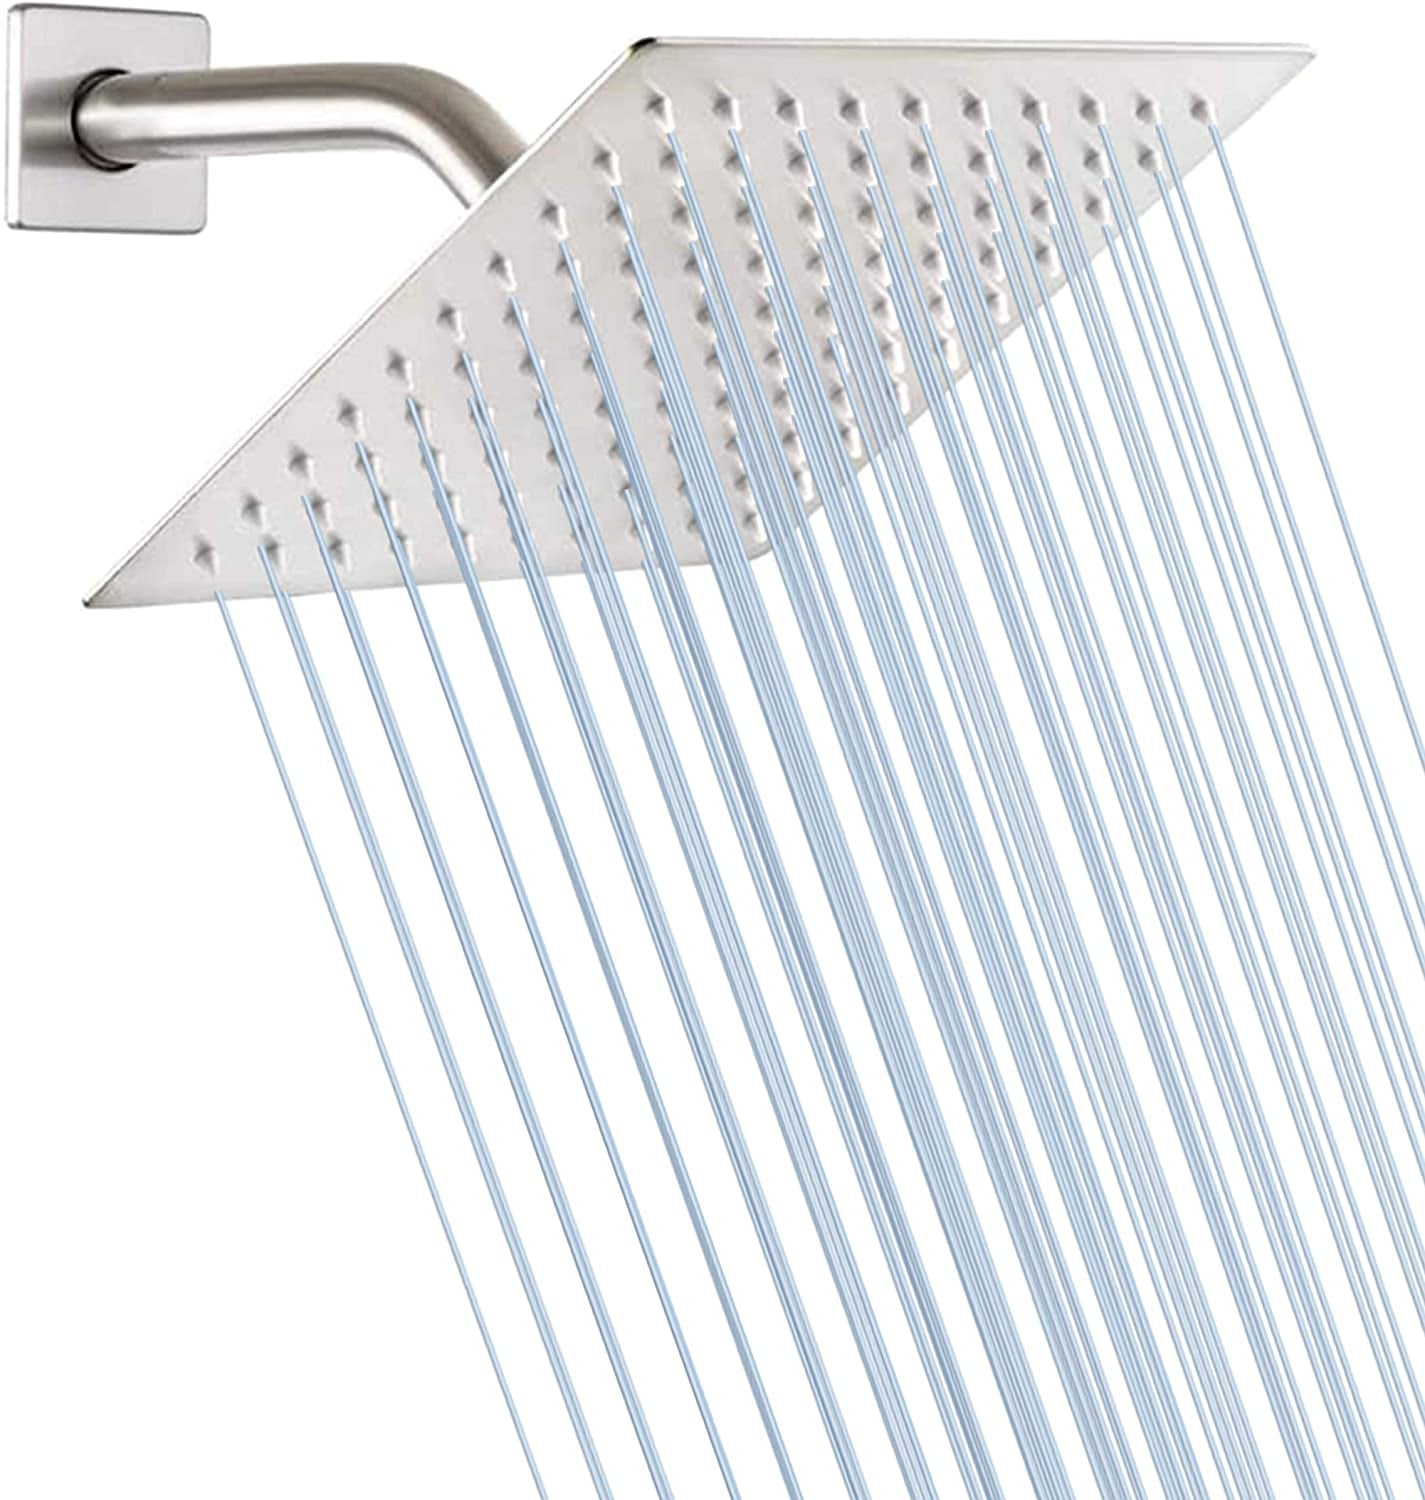 Square10" Square Stainless Steel Shower Head Rain Style Heads Chrome Ultra Thin 